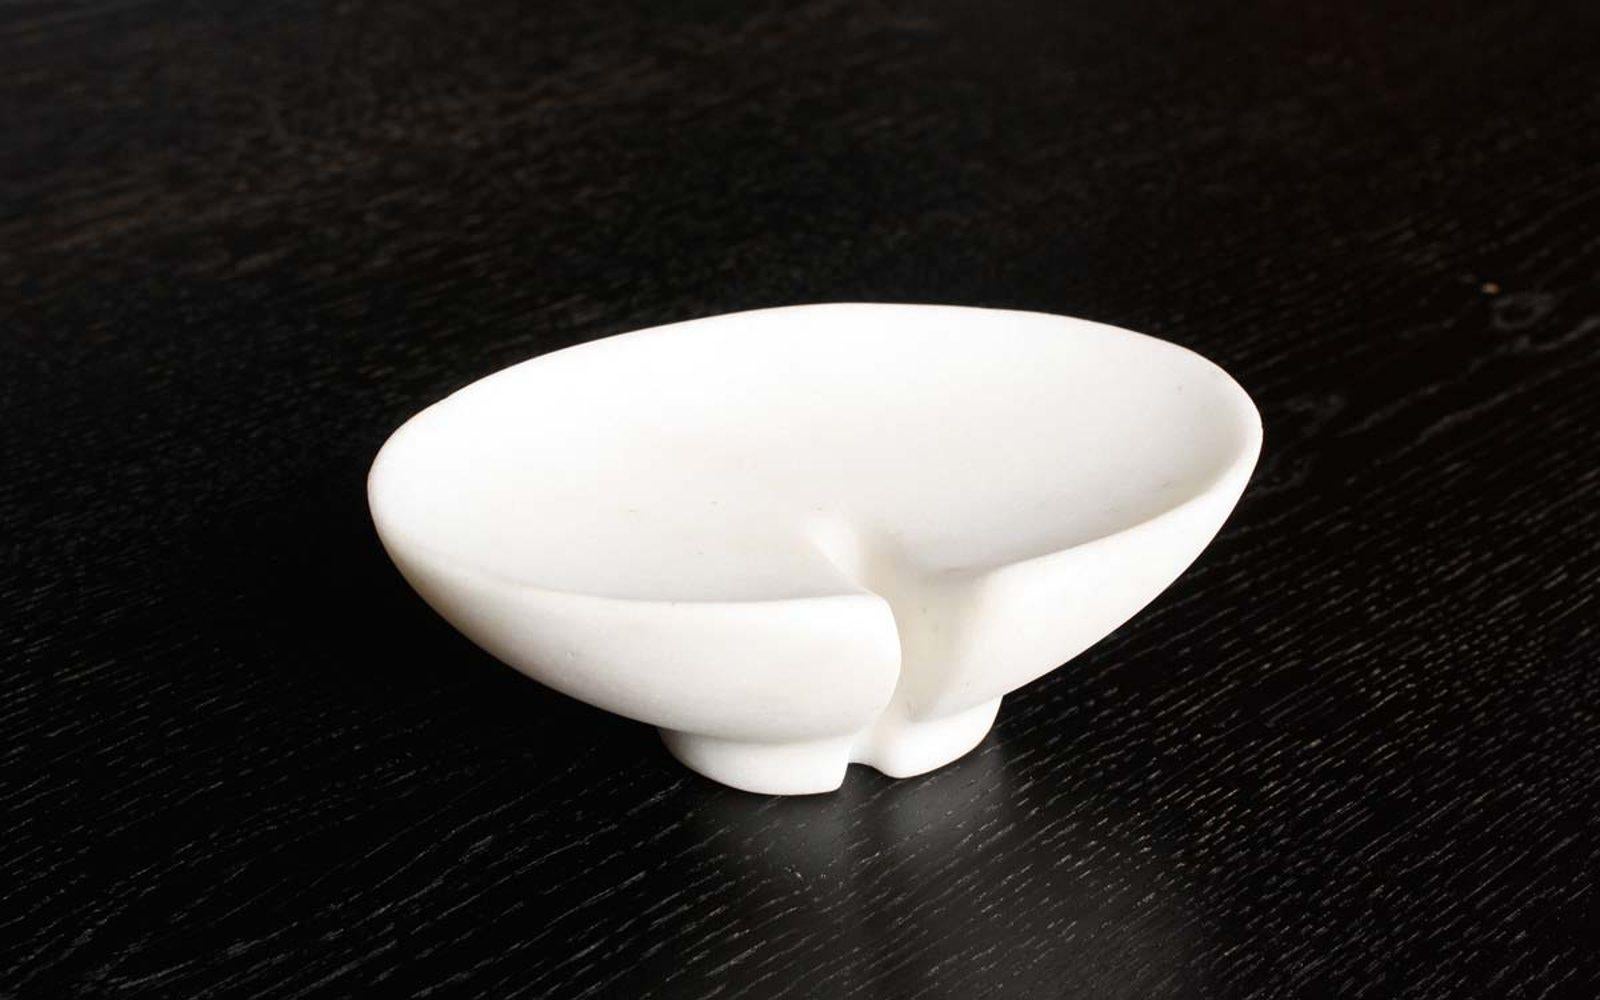 These hand-carved marble soap dishes are crafted by traditional artisans in Rajasthan State, India. Their shape derives from lily pads, and they drain excellently, sparing one's soap from getting soggy. Hand-made, so individual items may vary subtly